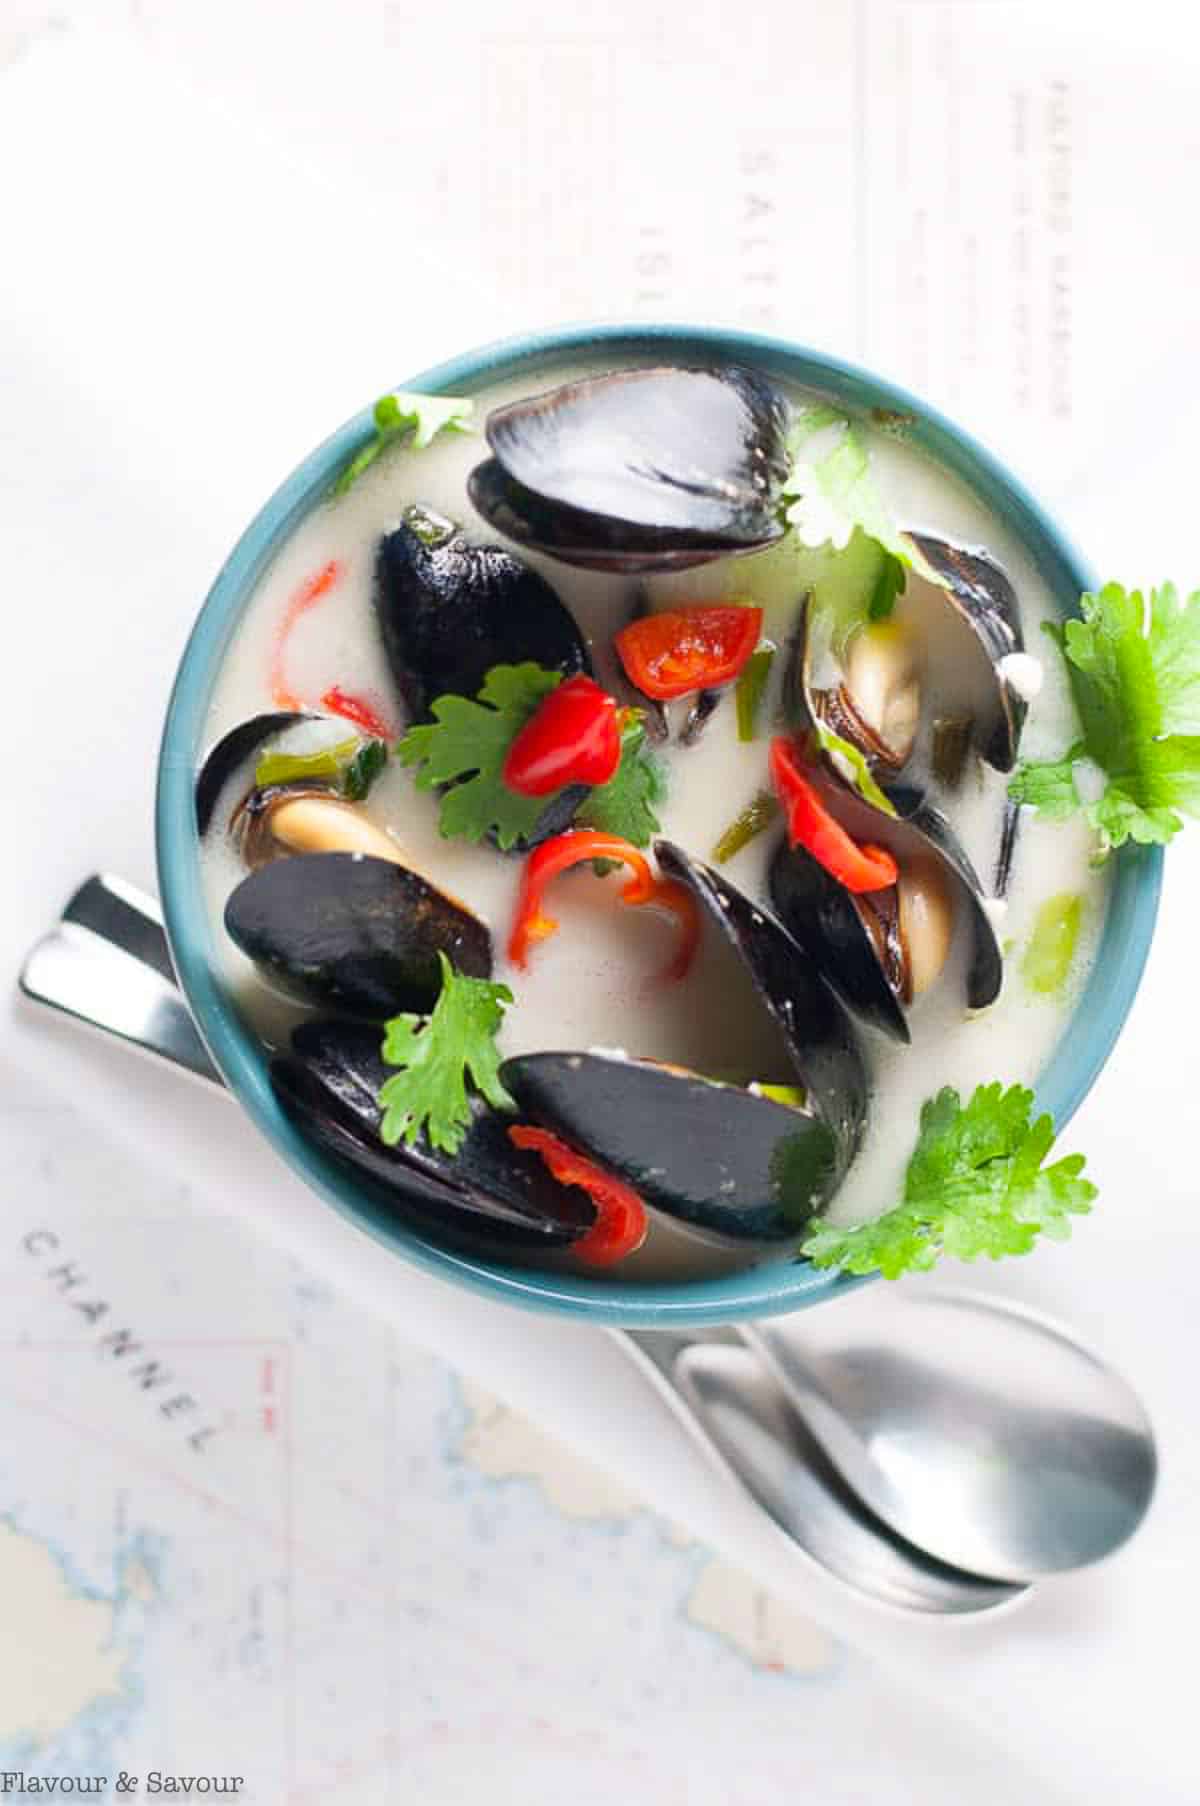 Spicy Thai mussels with red chili peppers in a soup bowl.